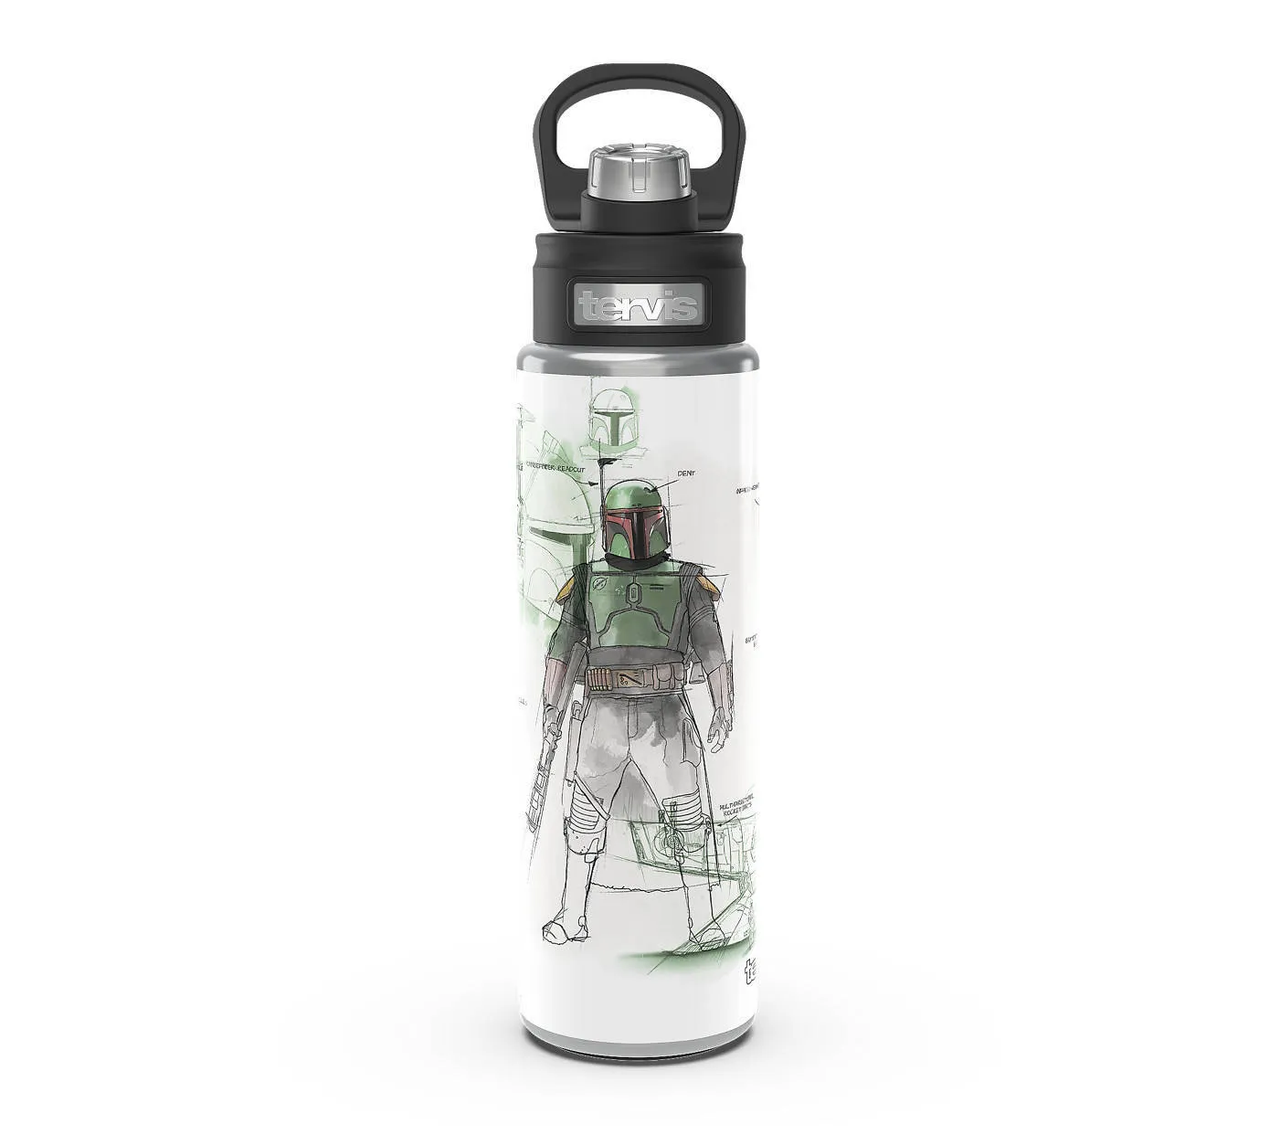 Star Wars Boba Fett Schematic 24oz Stainless Steel Wide Mouth Bottle with Deluxe Spout Lid Tervis Tumbler